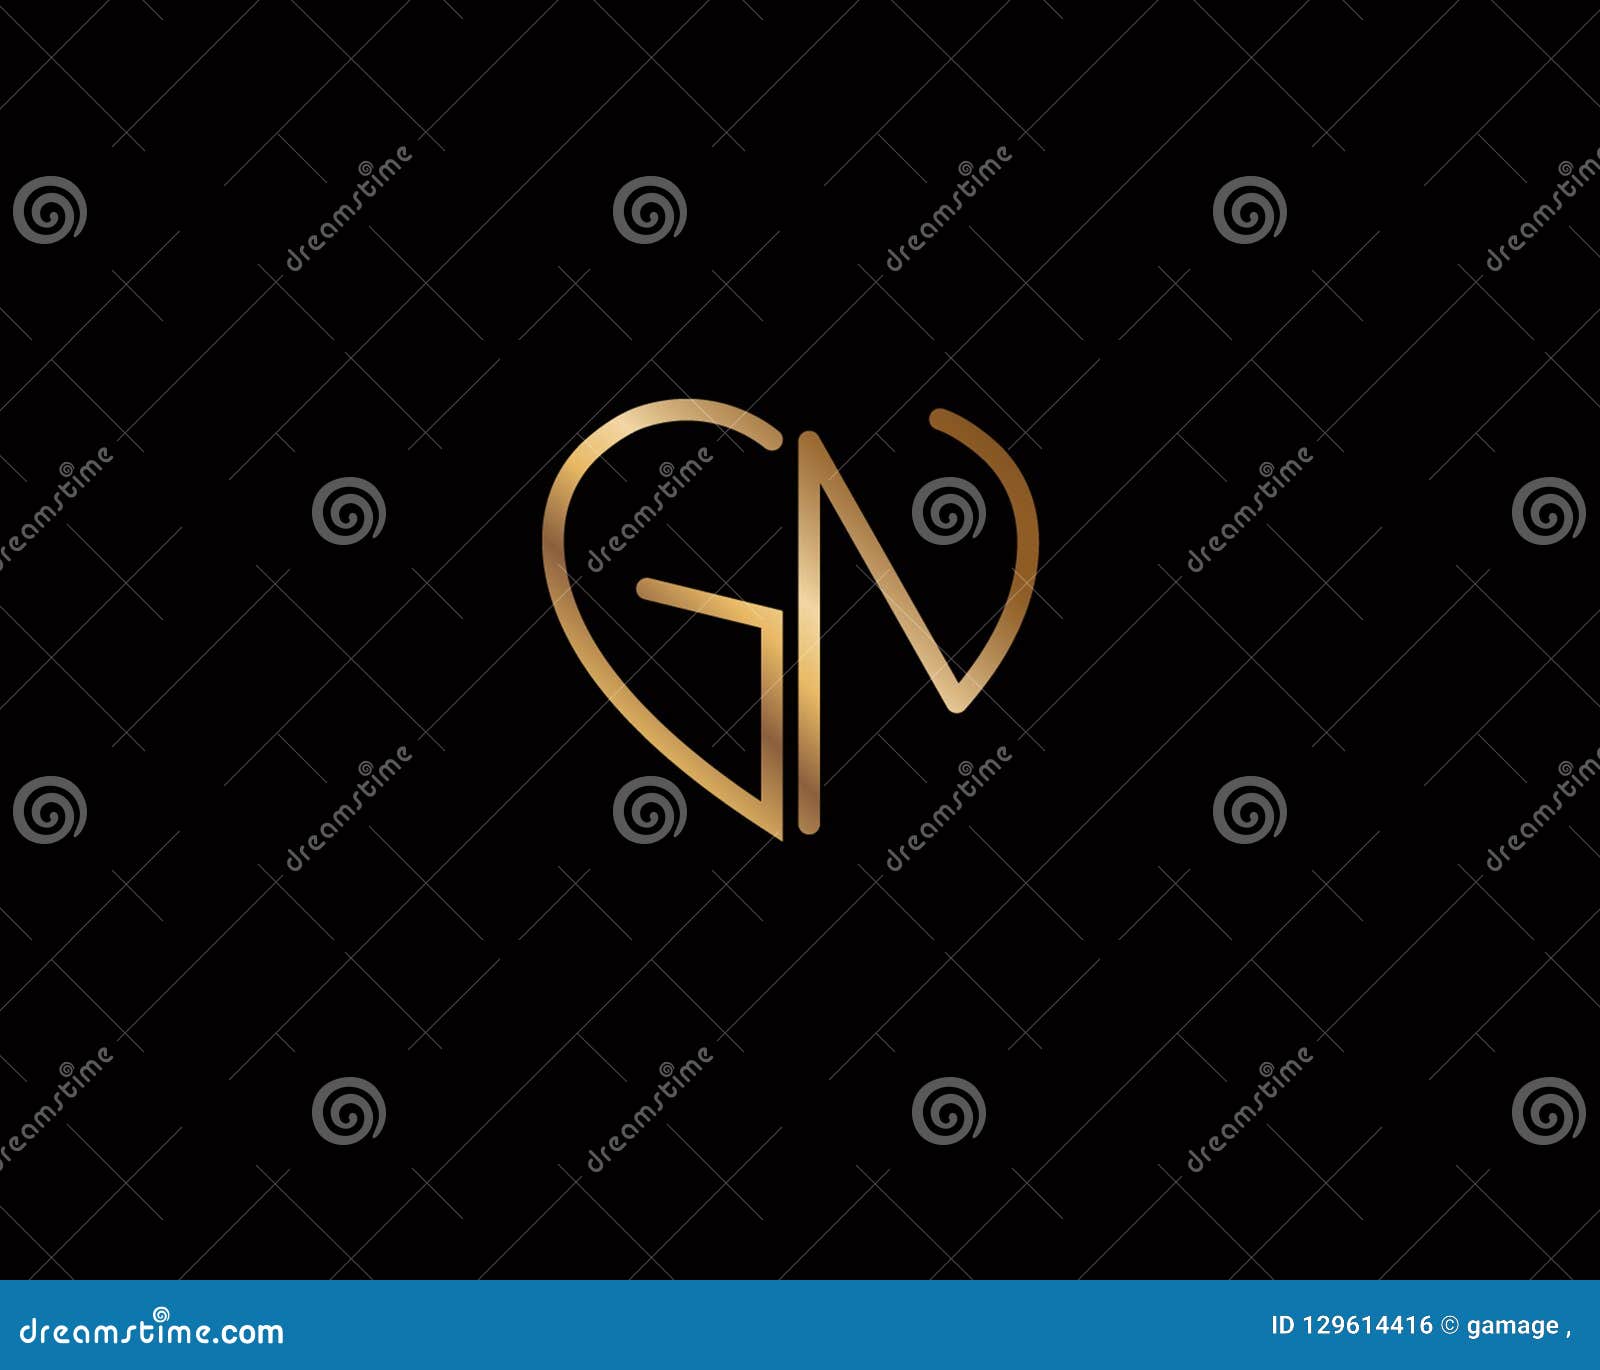 Gn Letters Logo Negative Space Design Stock Vector (Royalty Free)  2118116903 | Shutterstock